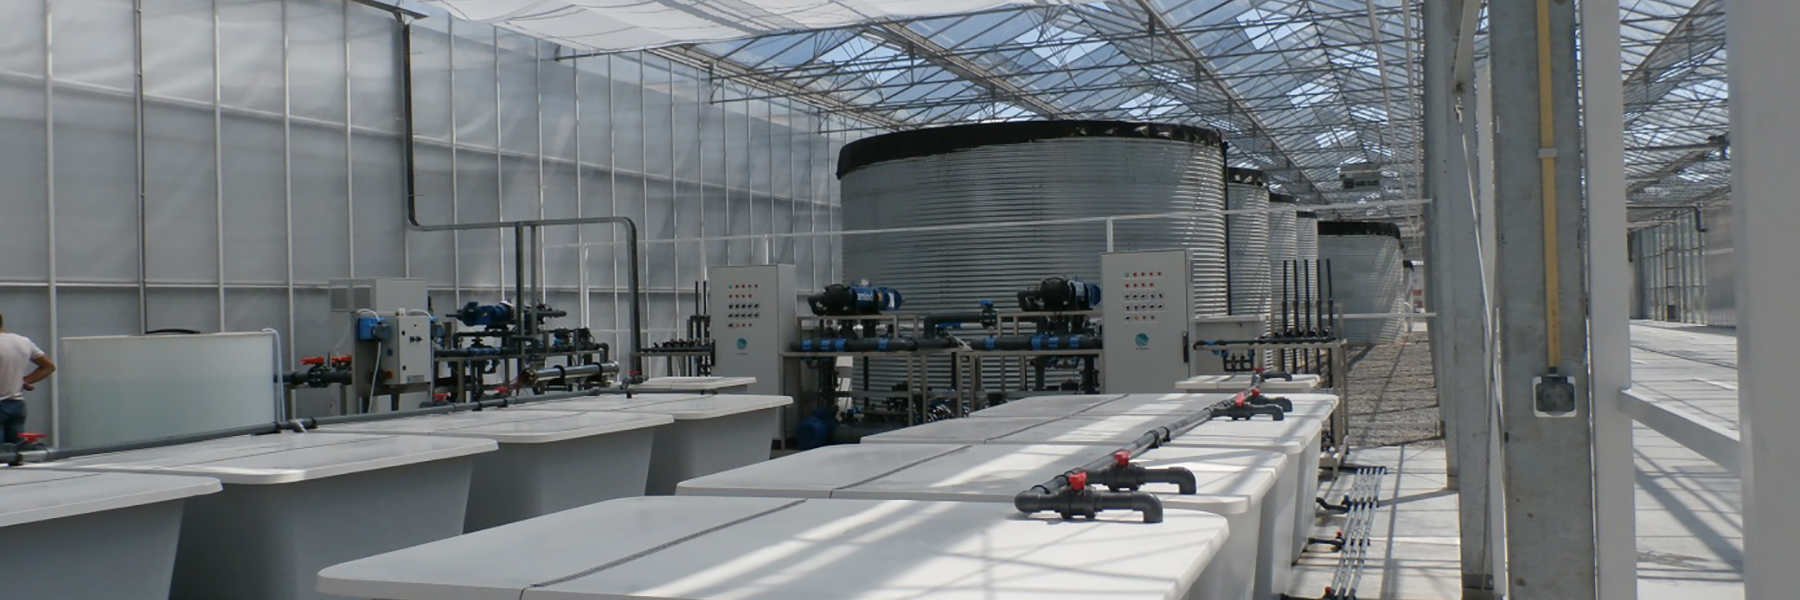 Mixing tanks with irrigation unit